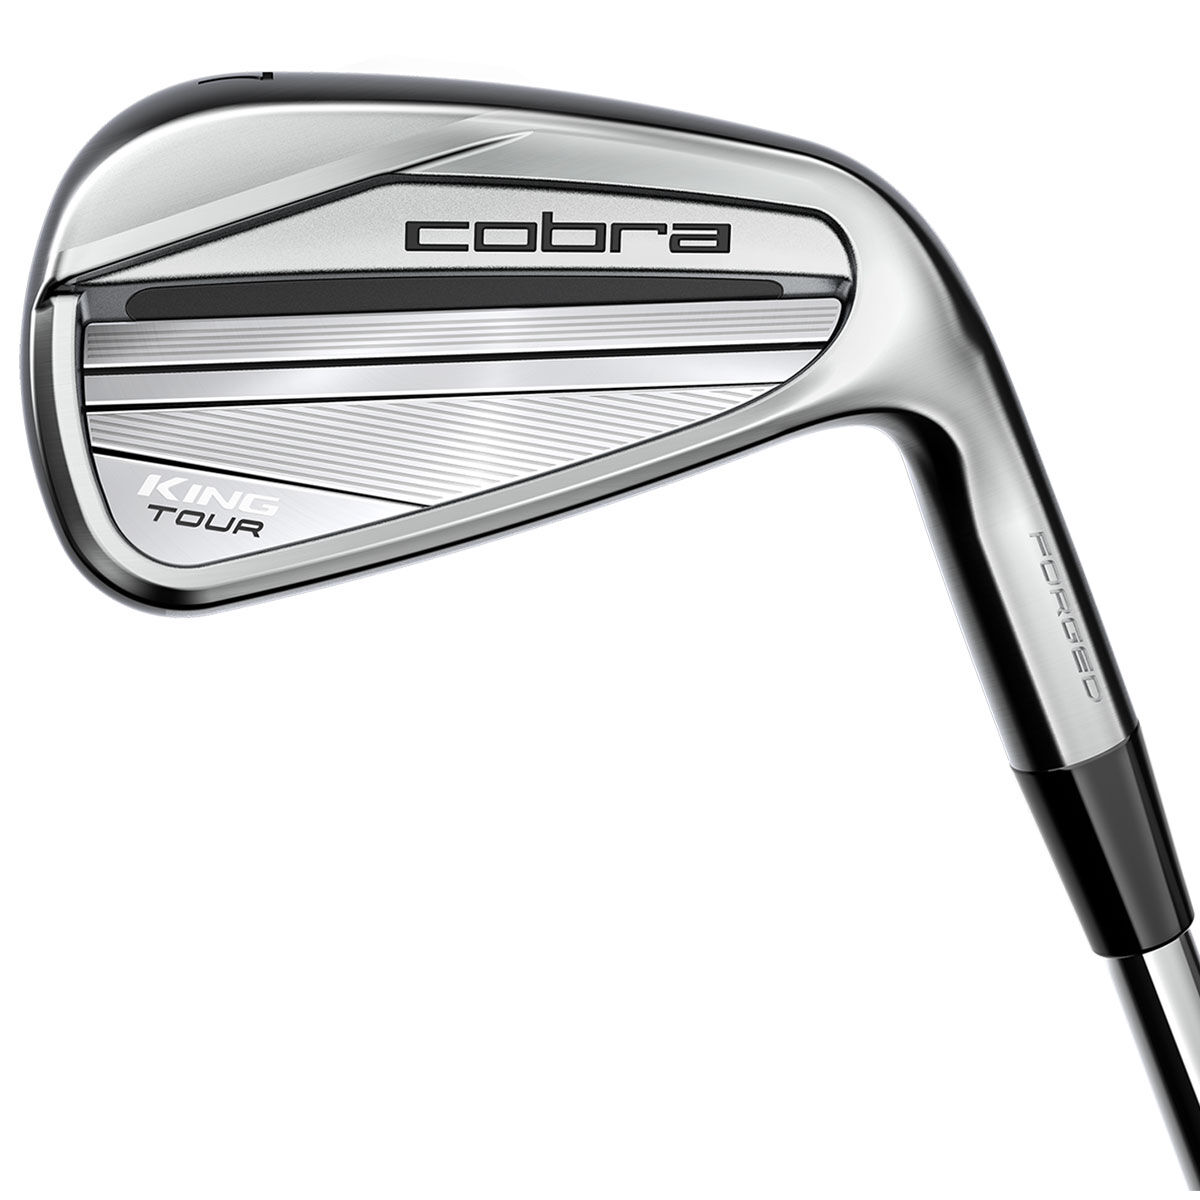 Cobra Golf Grey and Black King Tour Steel Stiff Right Hand 7 Golf Irons, Size: 4-pw | American Golf